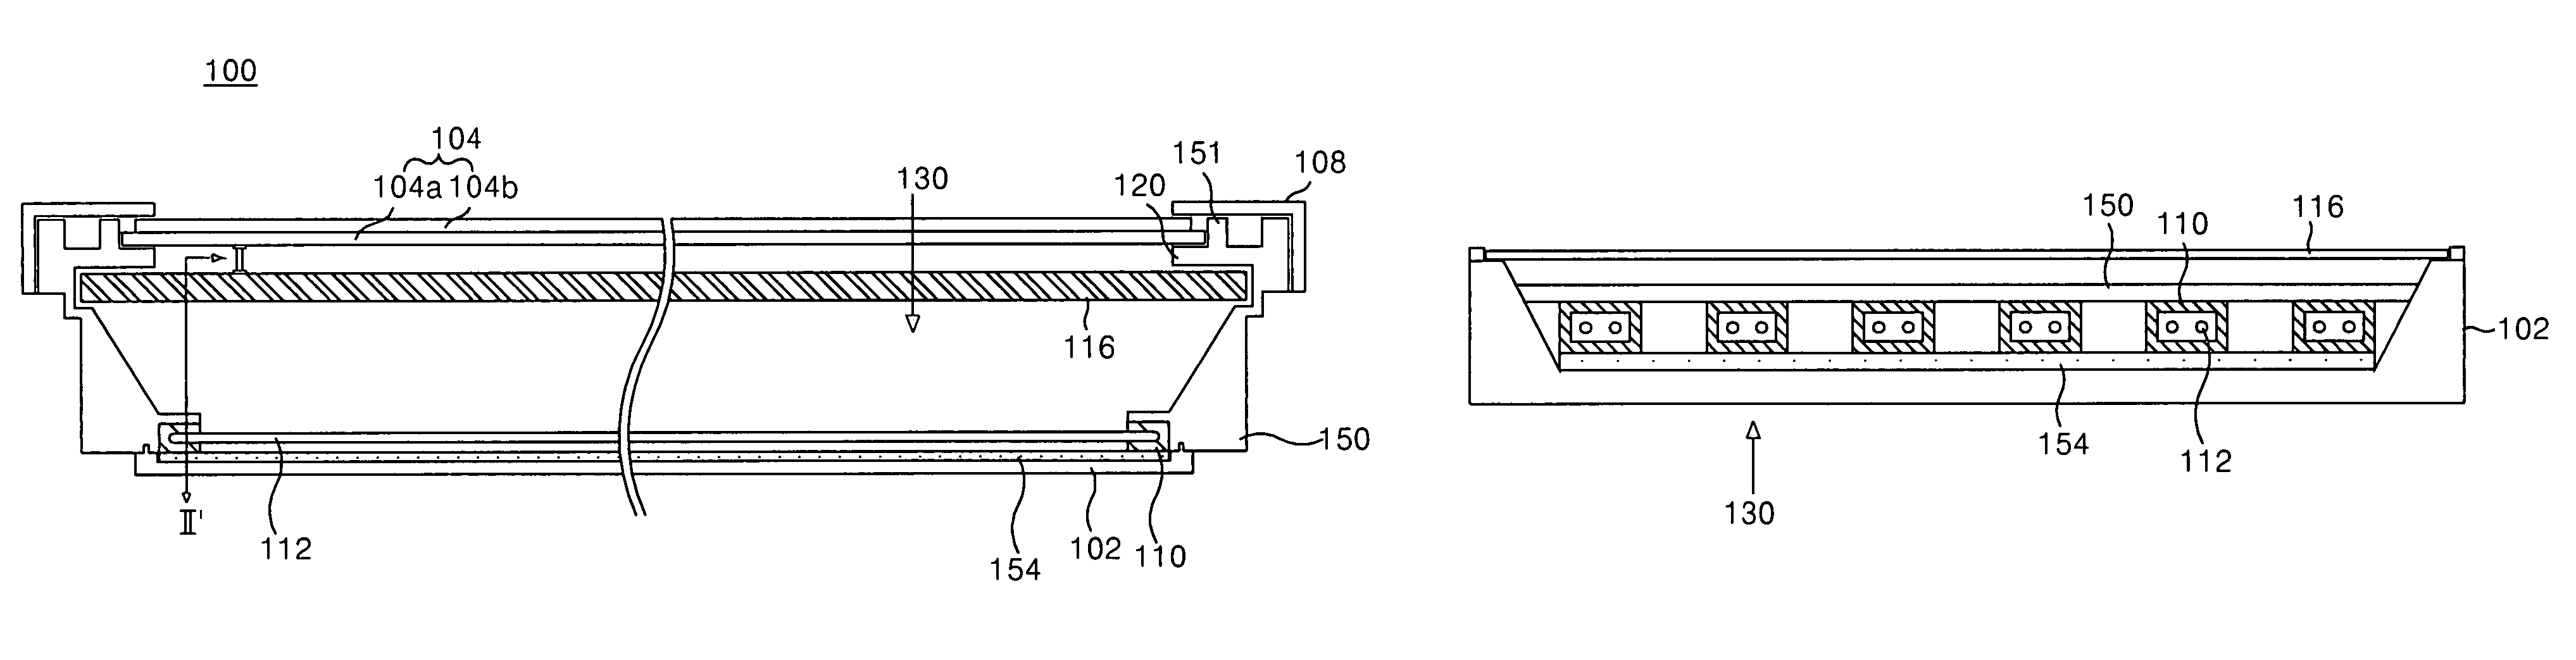 Liquid crystal display module and assembling method thereof